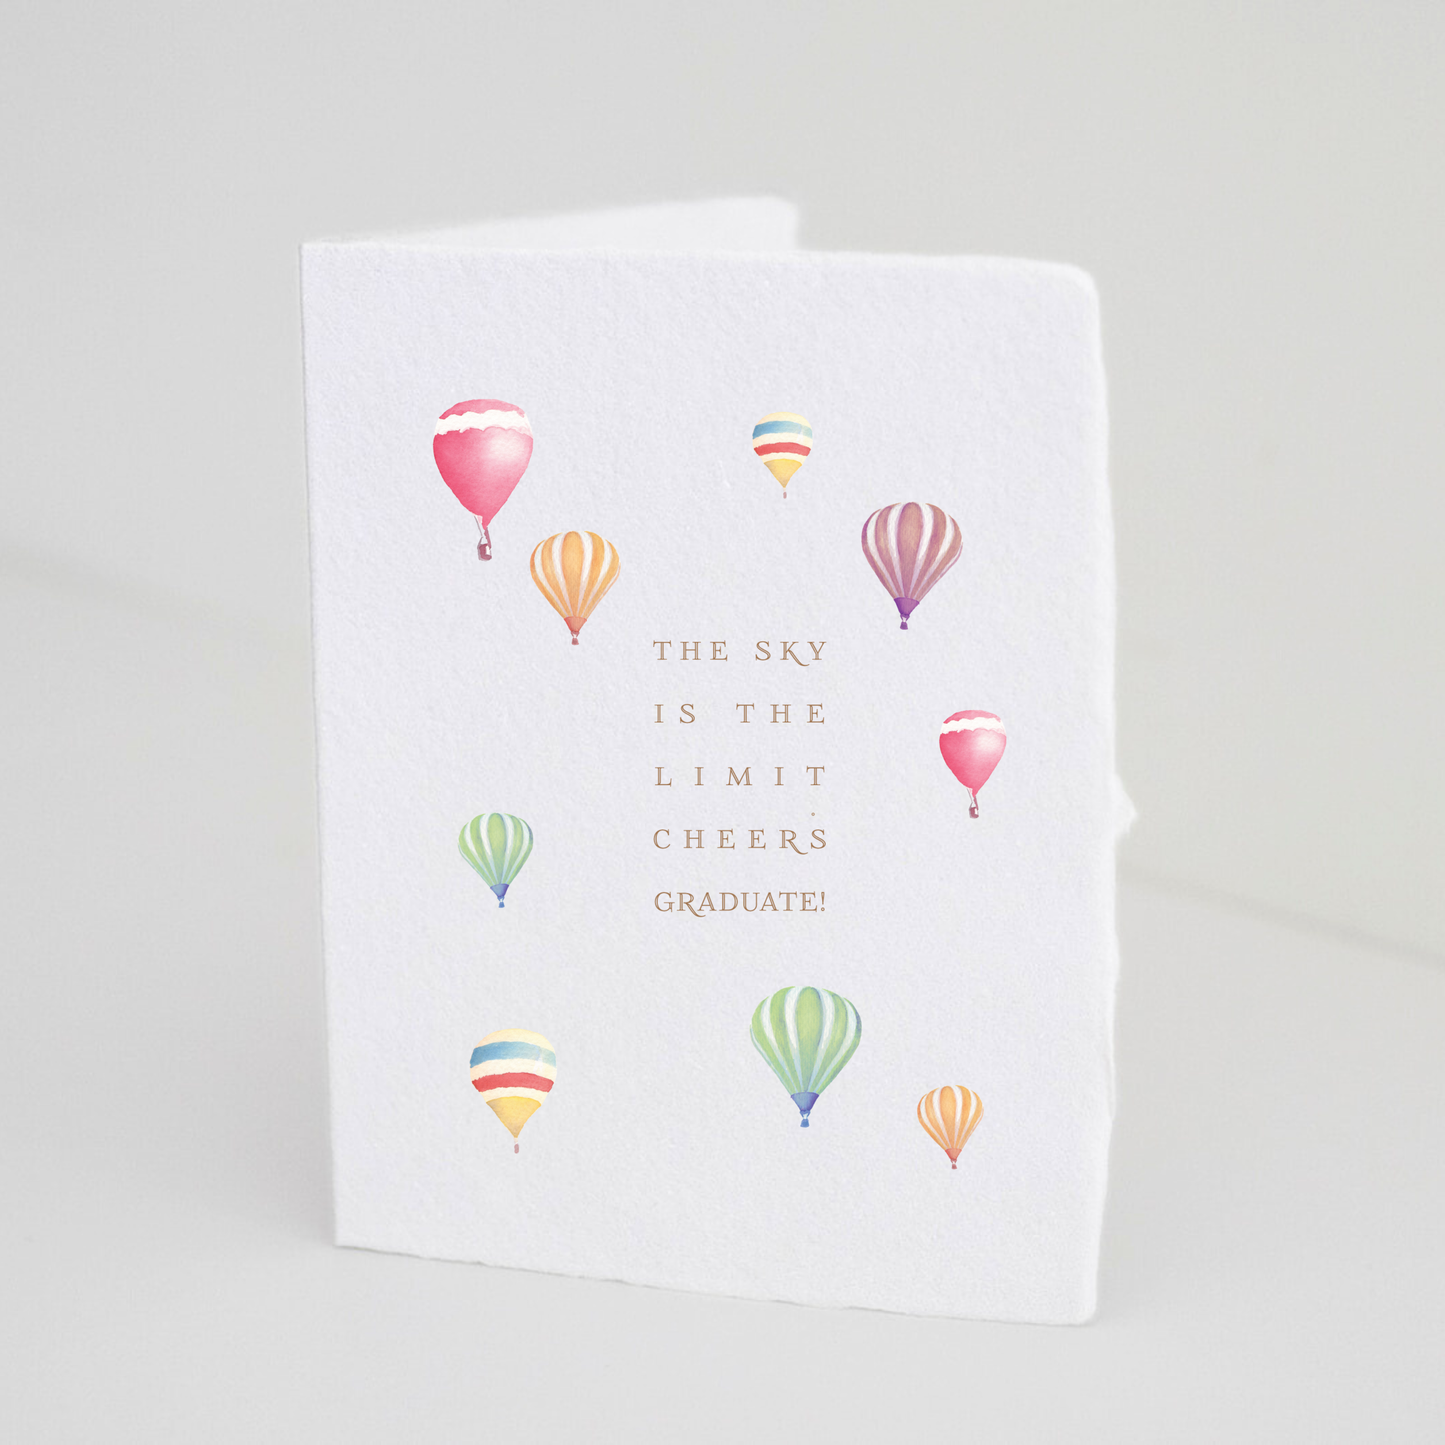 "Sky is the limit. Cheers Graduate" Graduation Card